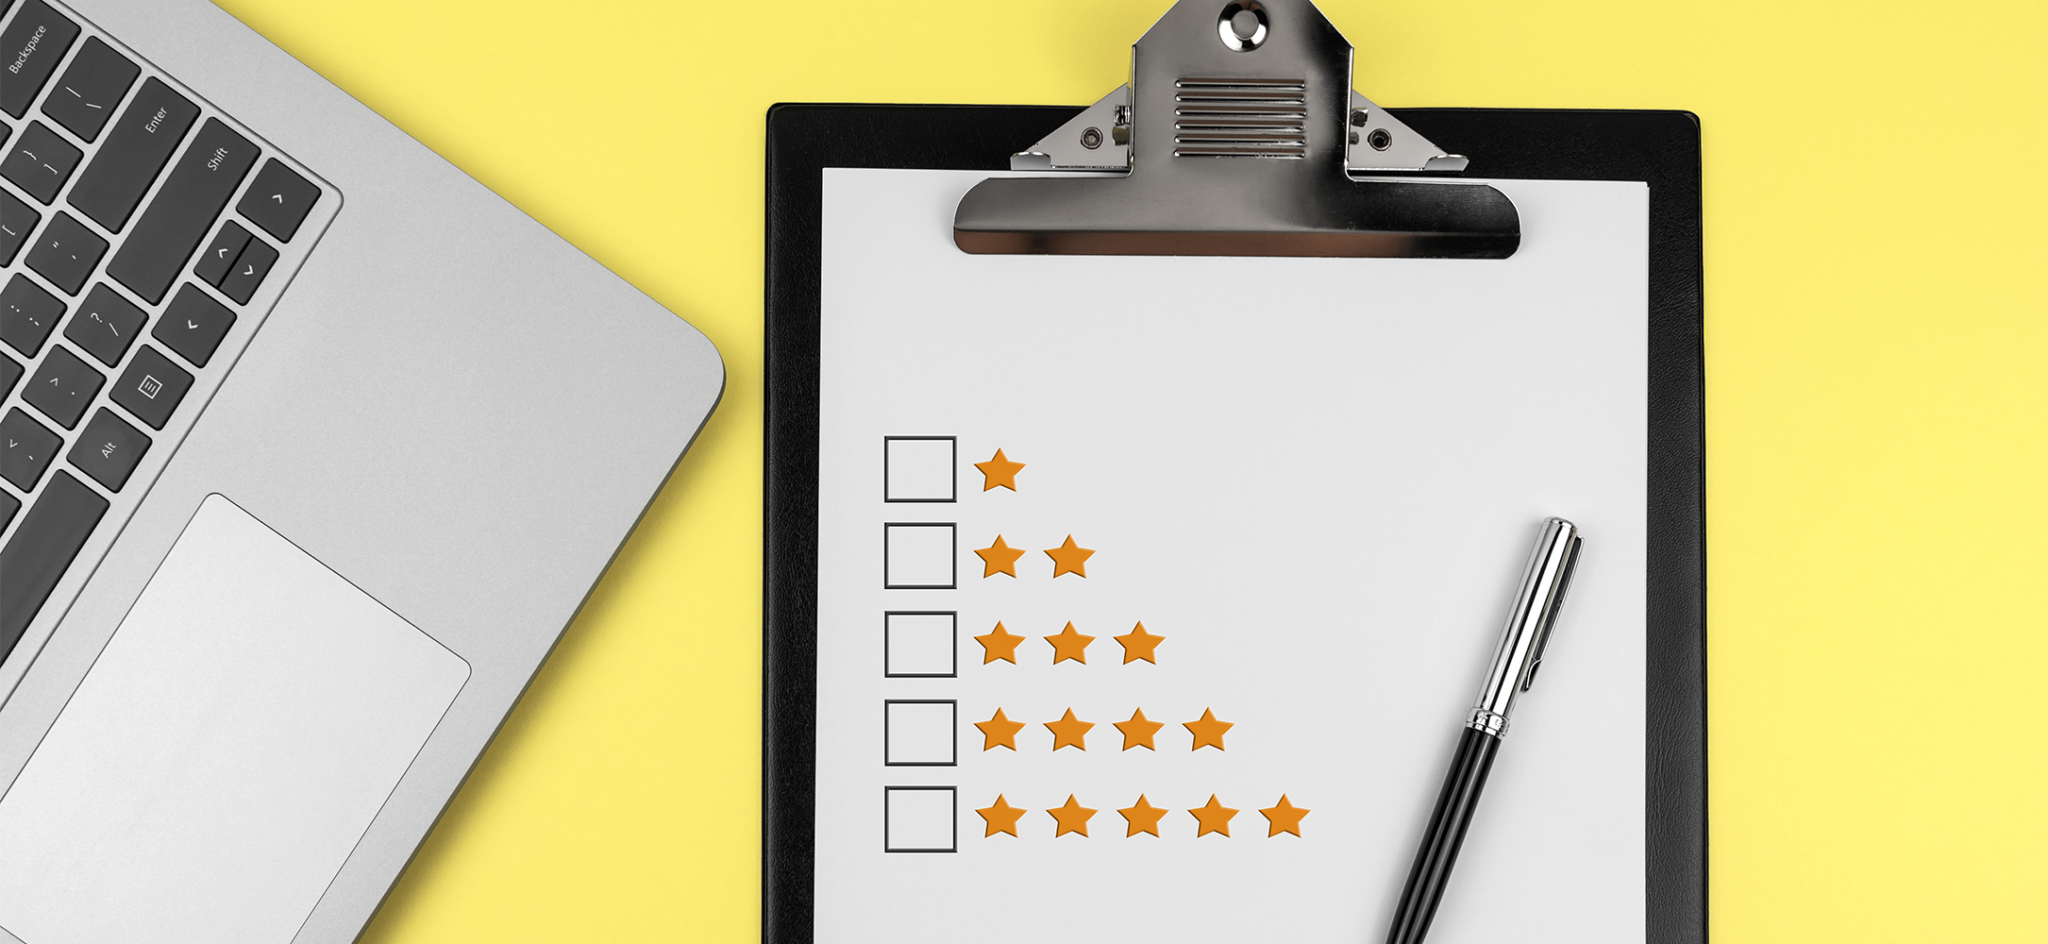 Laptop and clipboard with one to five star ratings representing an assessment